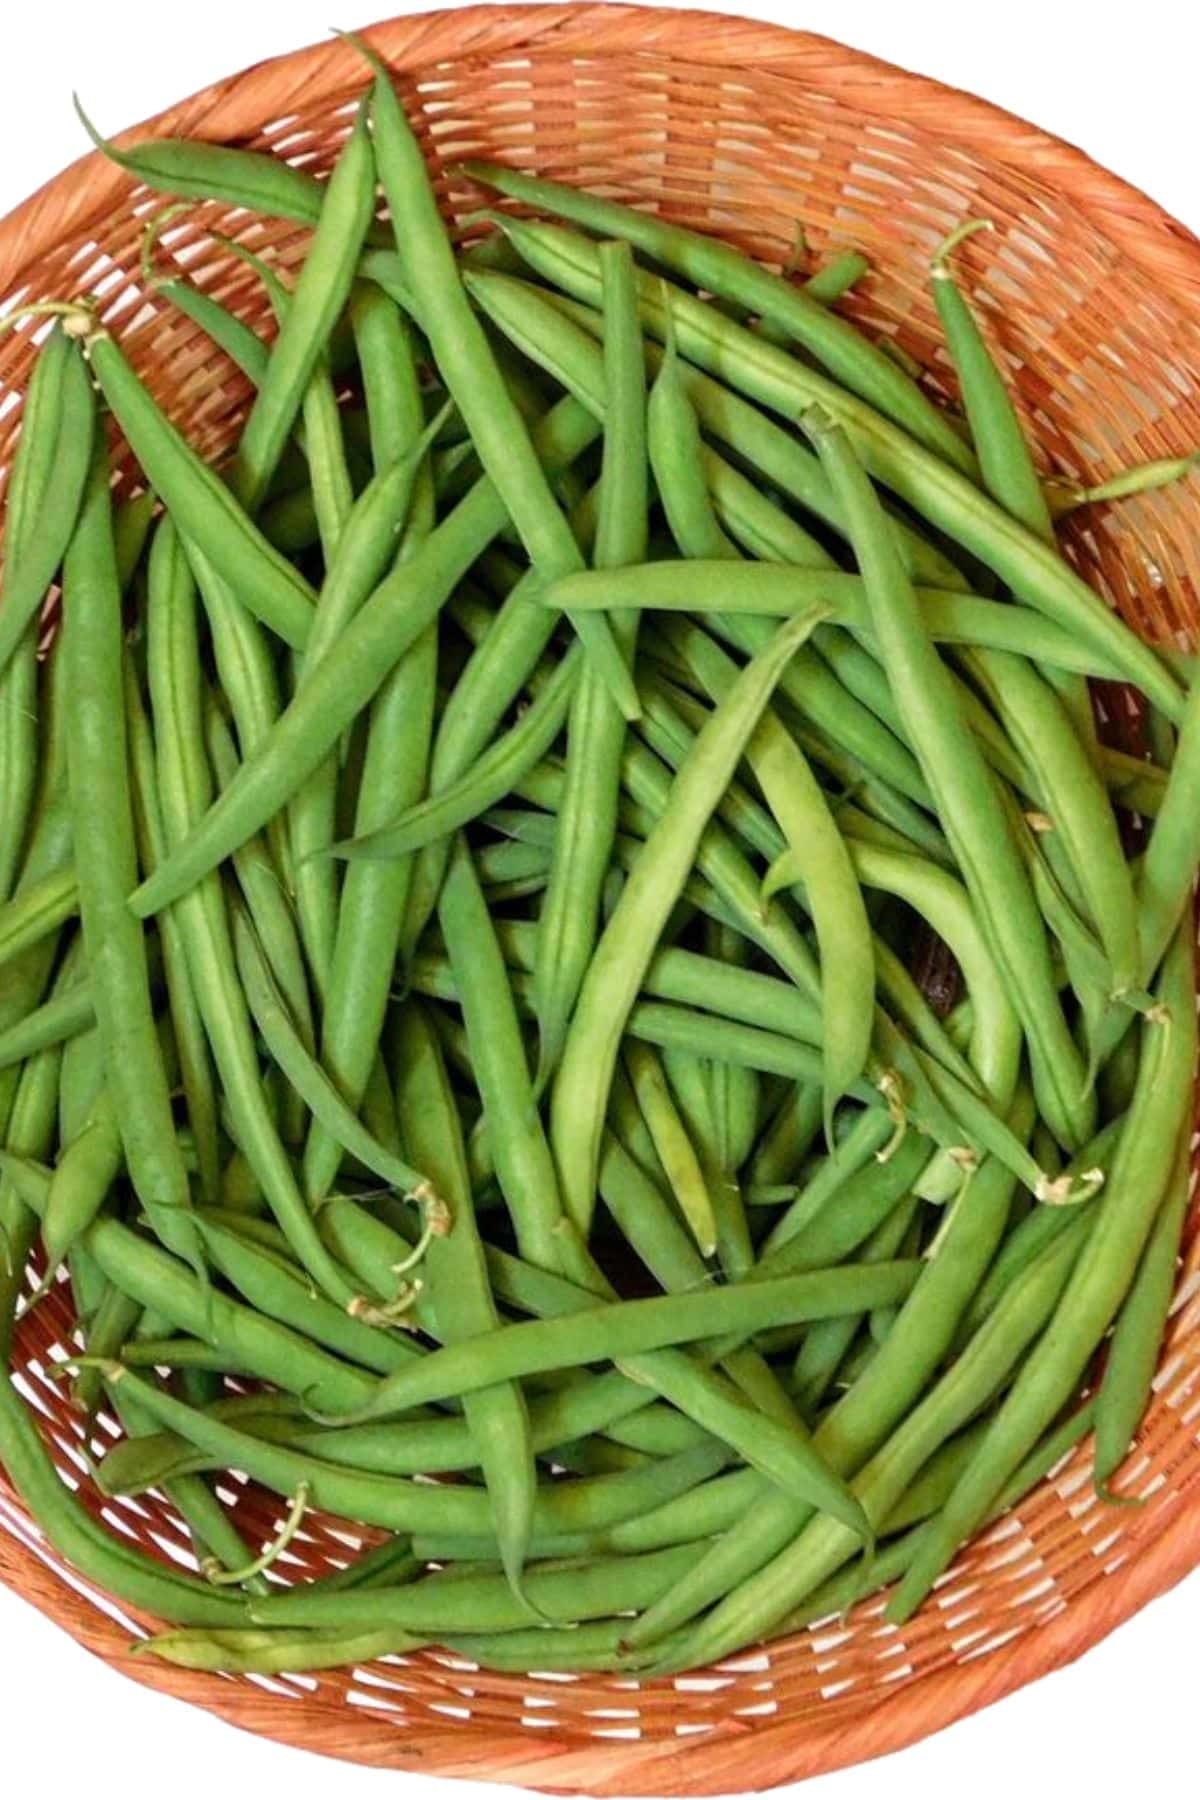 A basket filled with fresh green beans.